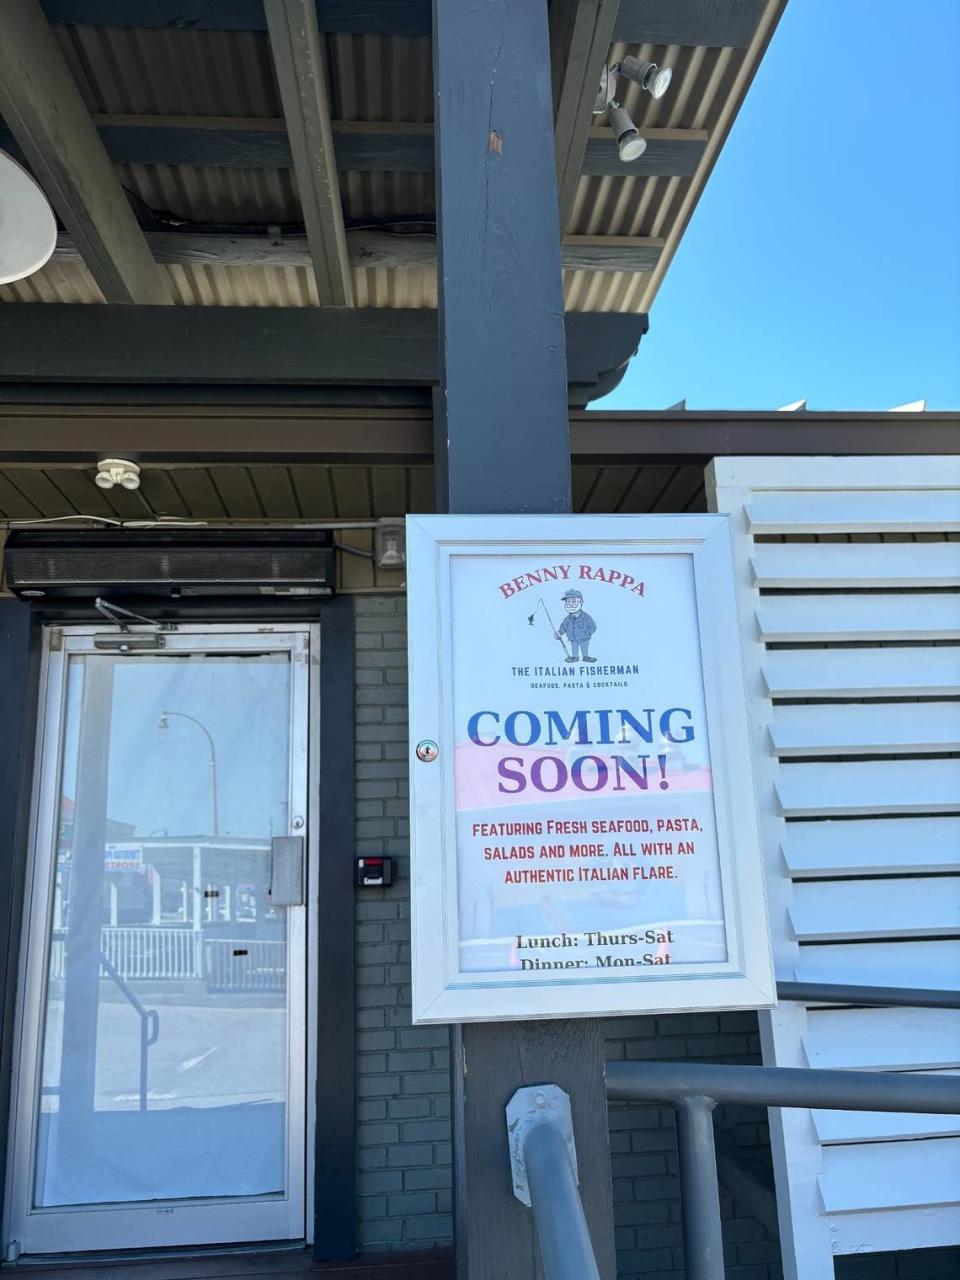 One of the signs informing customers that Benny Rappa the Italian Fisherman is going to be opening in the former Hurricane Colinz space.